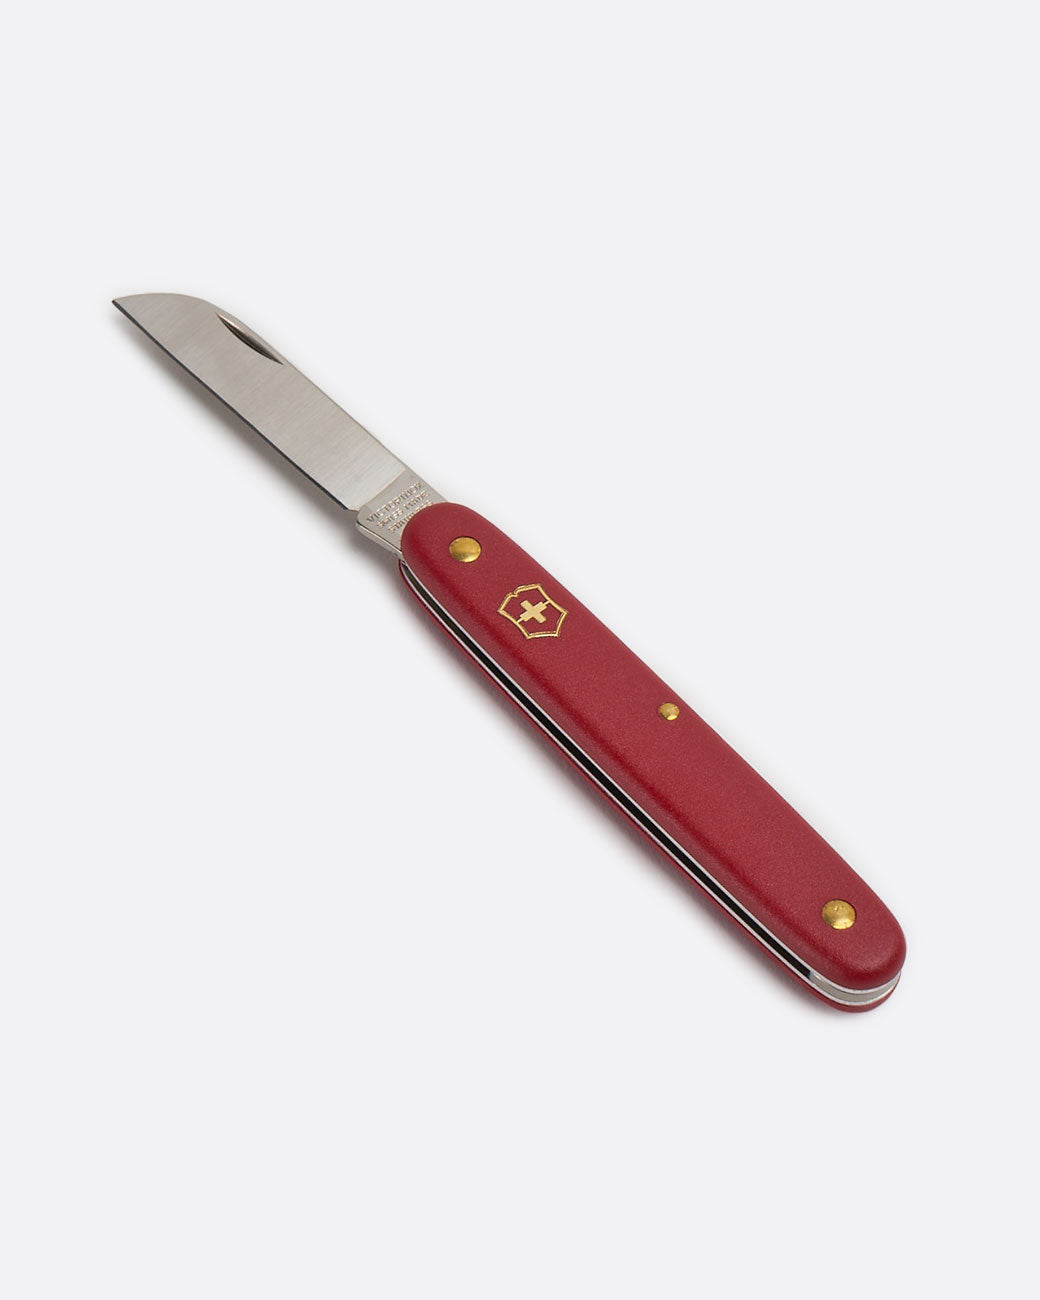 Victorinox floral knife with red handle, shown open